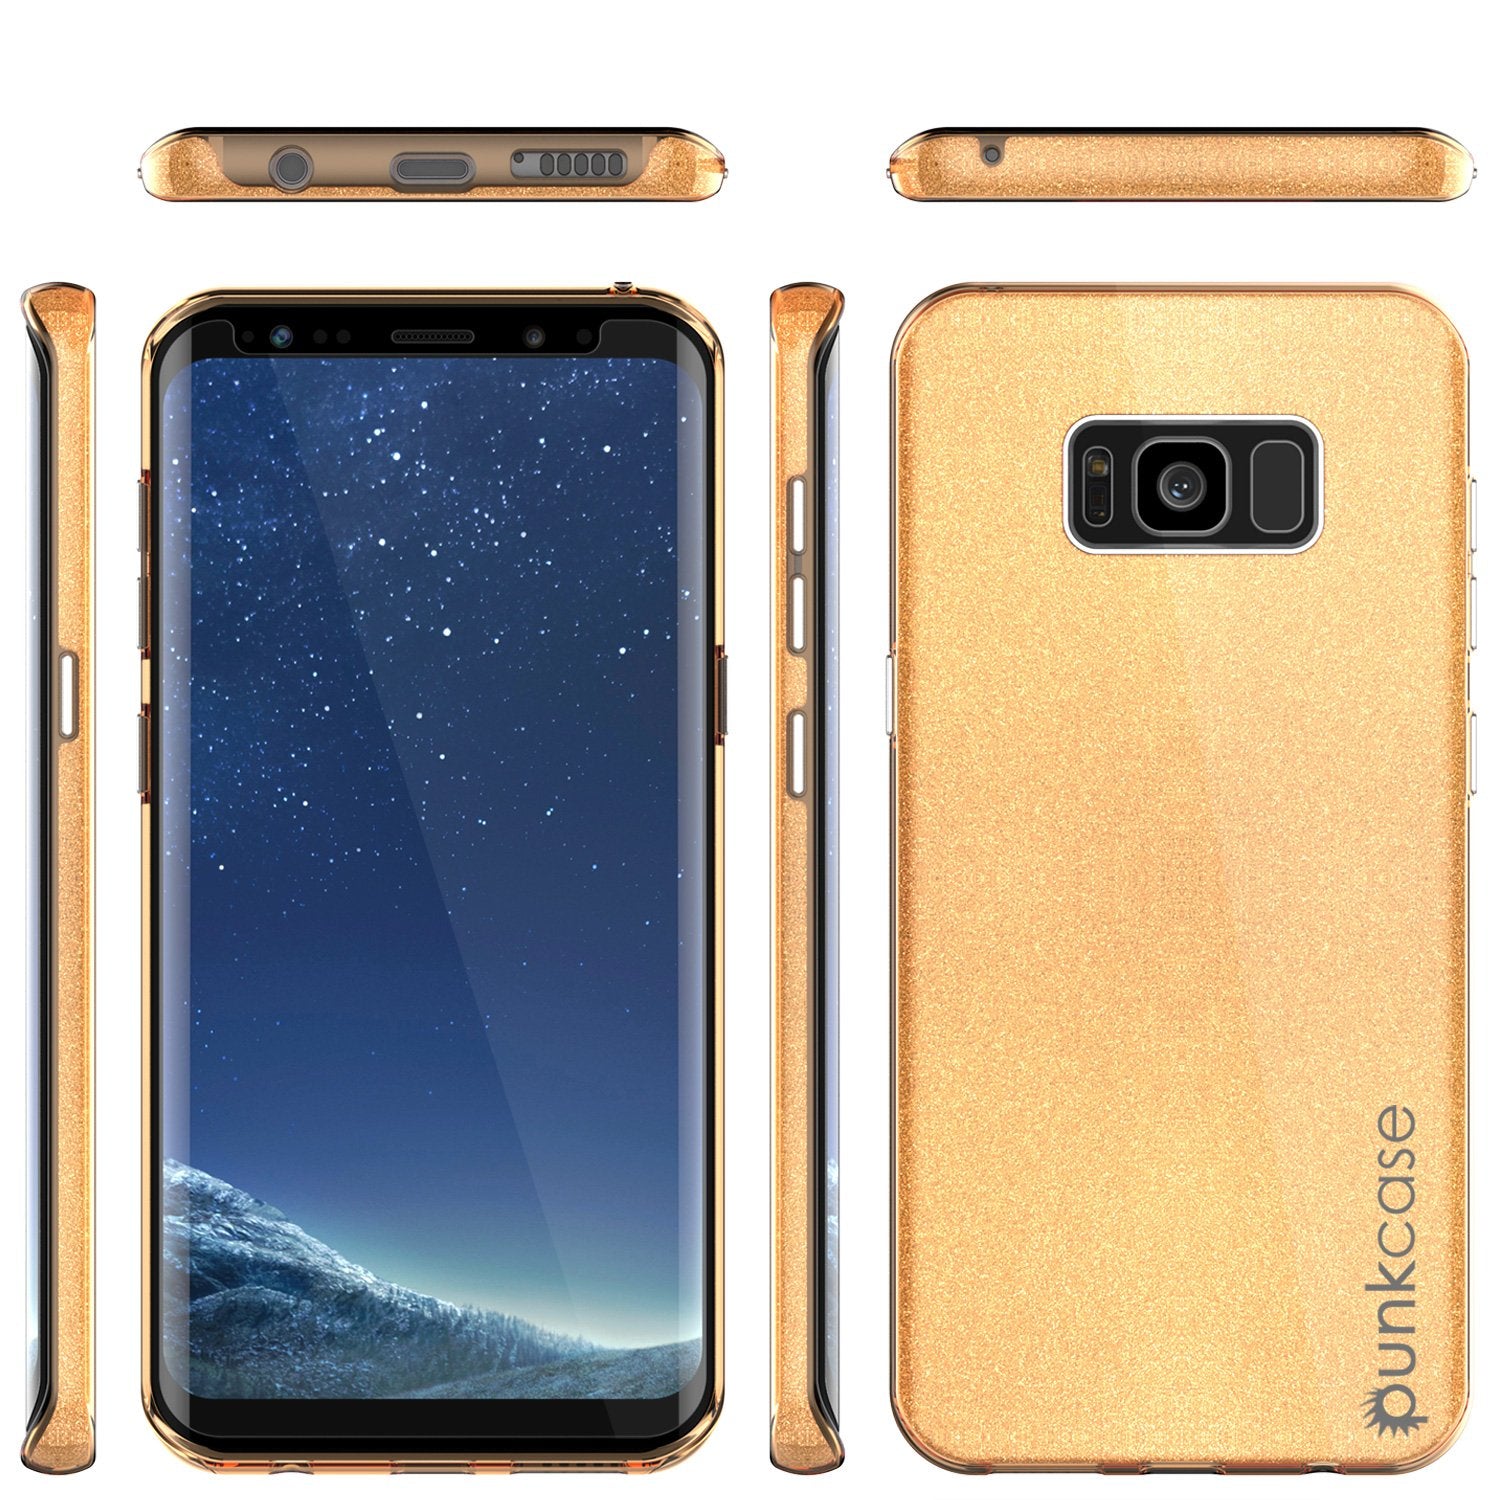 Galaxy S8 Case, Punkcase Galactic 2.0 Series Ultra Slim Protective Armor TPU Cover w/ PunkShield Screen Protector | Lifetime Exchange Warranty | Designed for Samsung Galaxy S8 [Gold] - PunkCase NZ